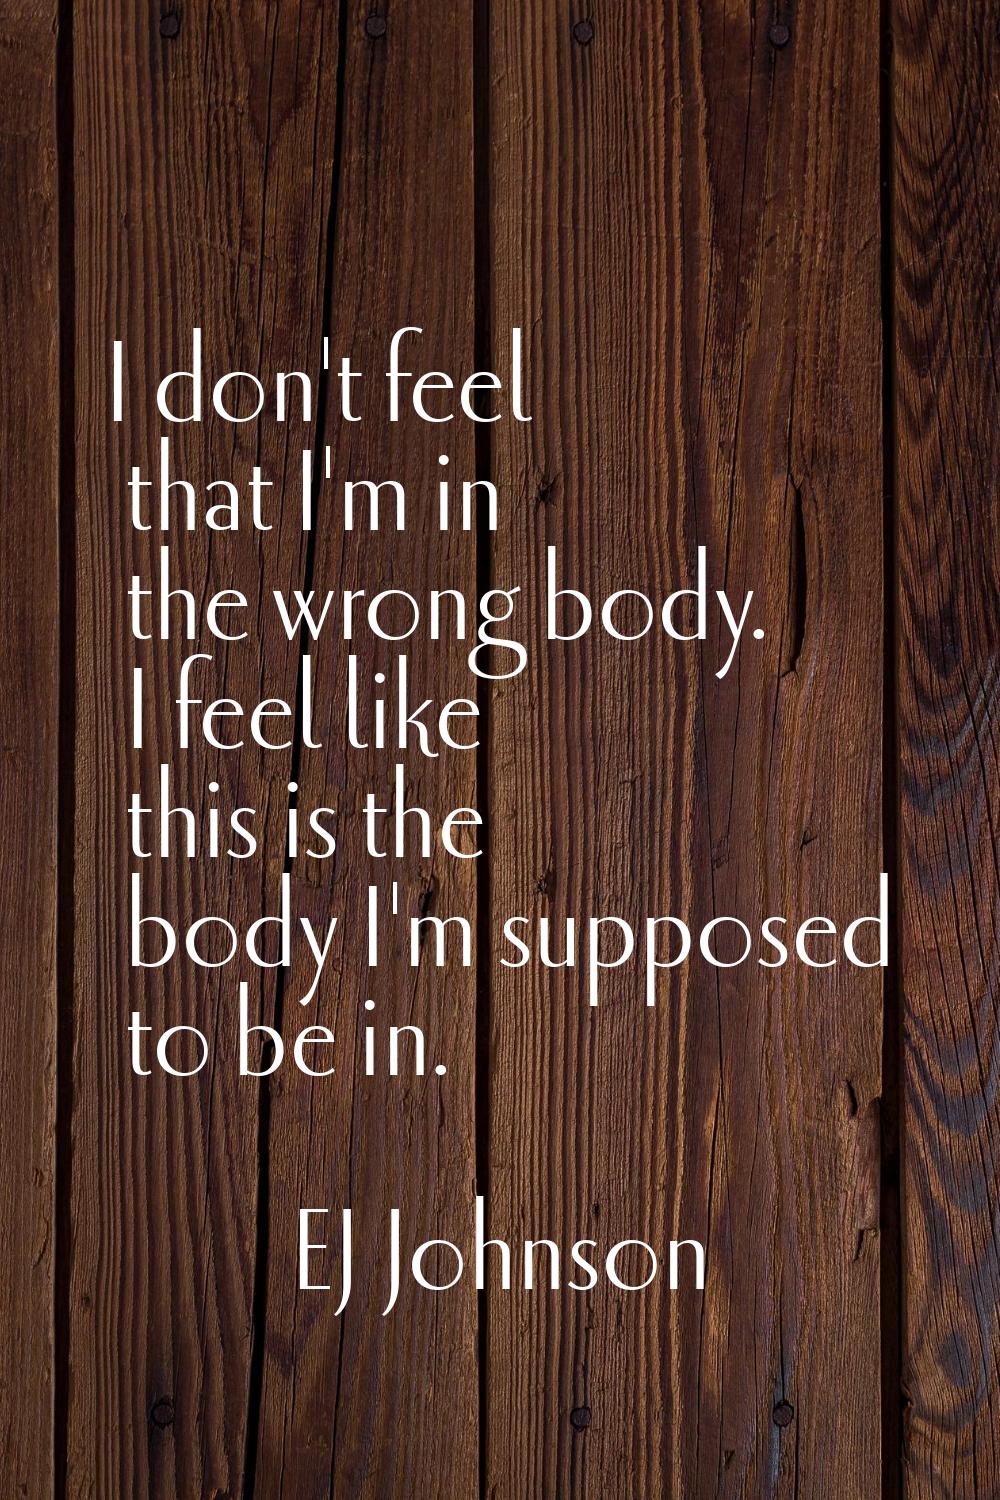 I don't feel that I'm in the wrong body. I feel like this is the body I'm supposed to be in.